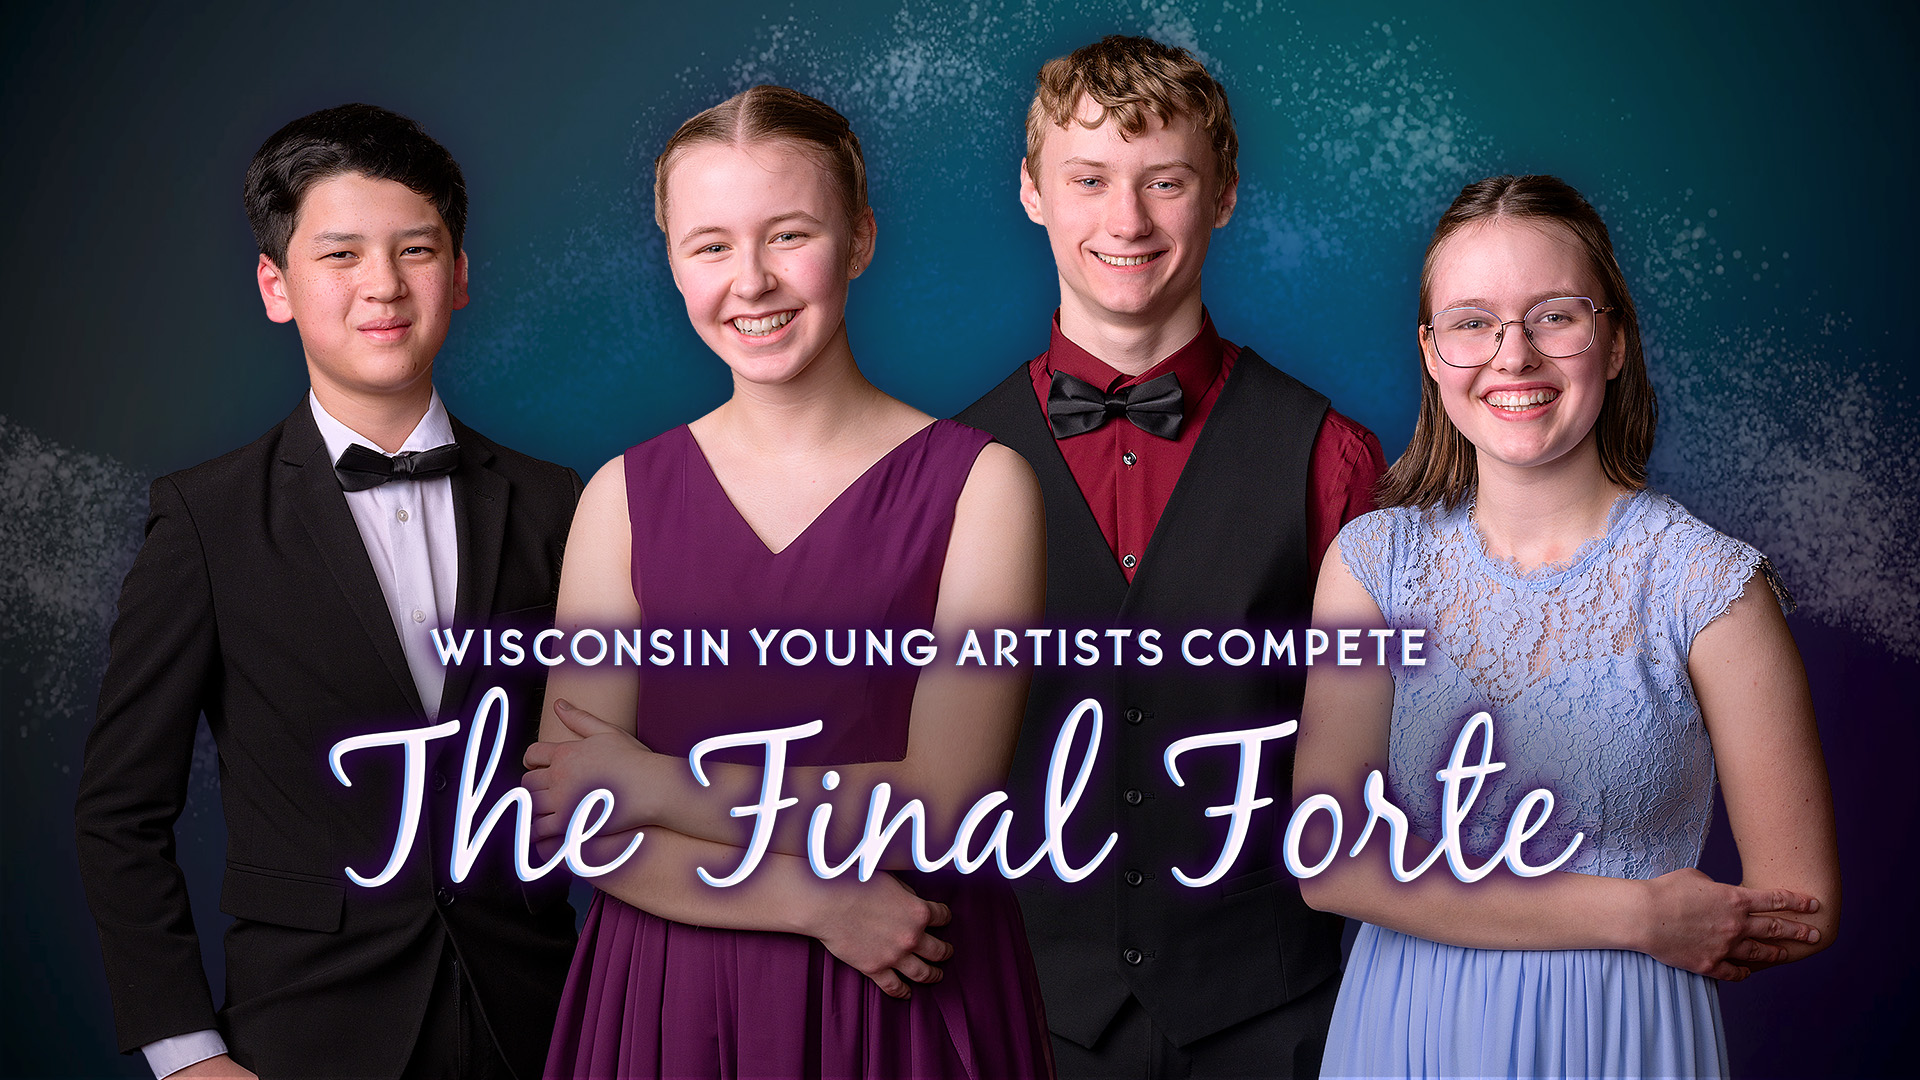 Four Final Forte 2024 finalists pose as a group in formal wear against a speckled blue textured backdrop. Text reading "Wisconsin Young Artists Compete: The Final Forte" overlays the bottom third of the group portrait.